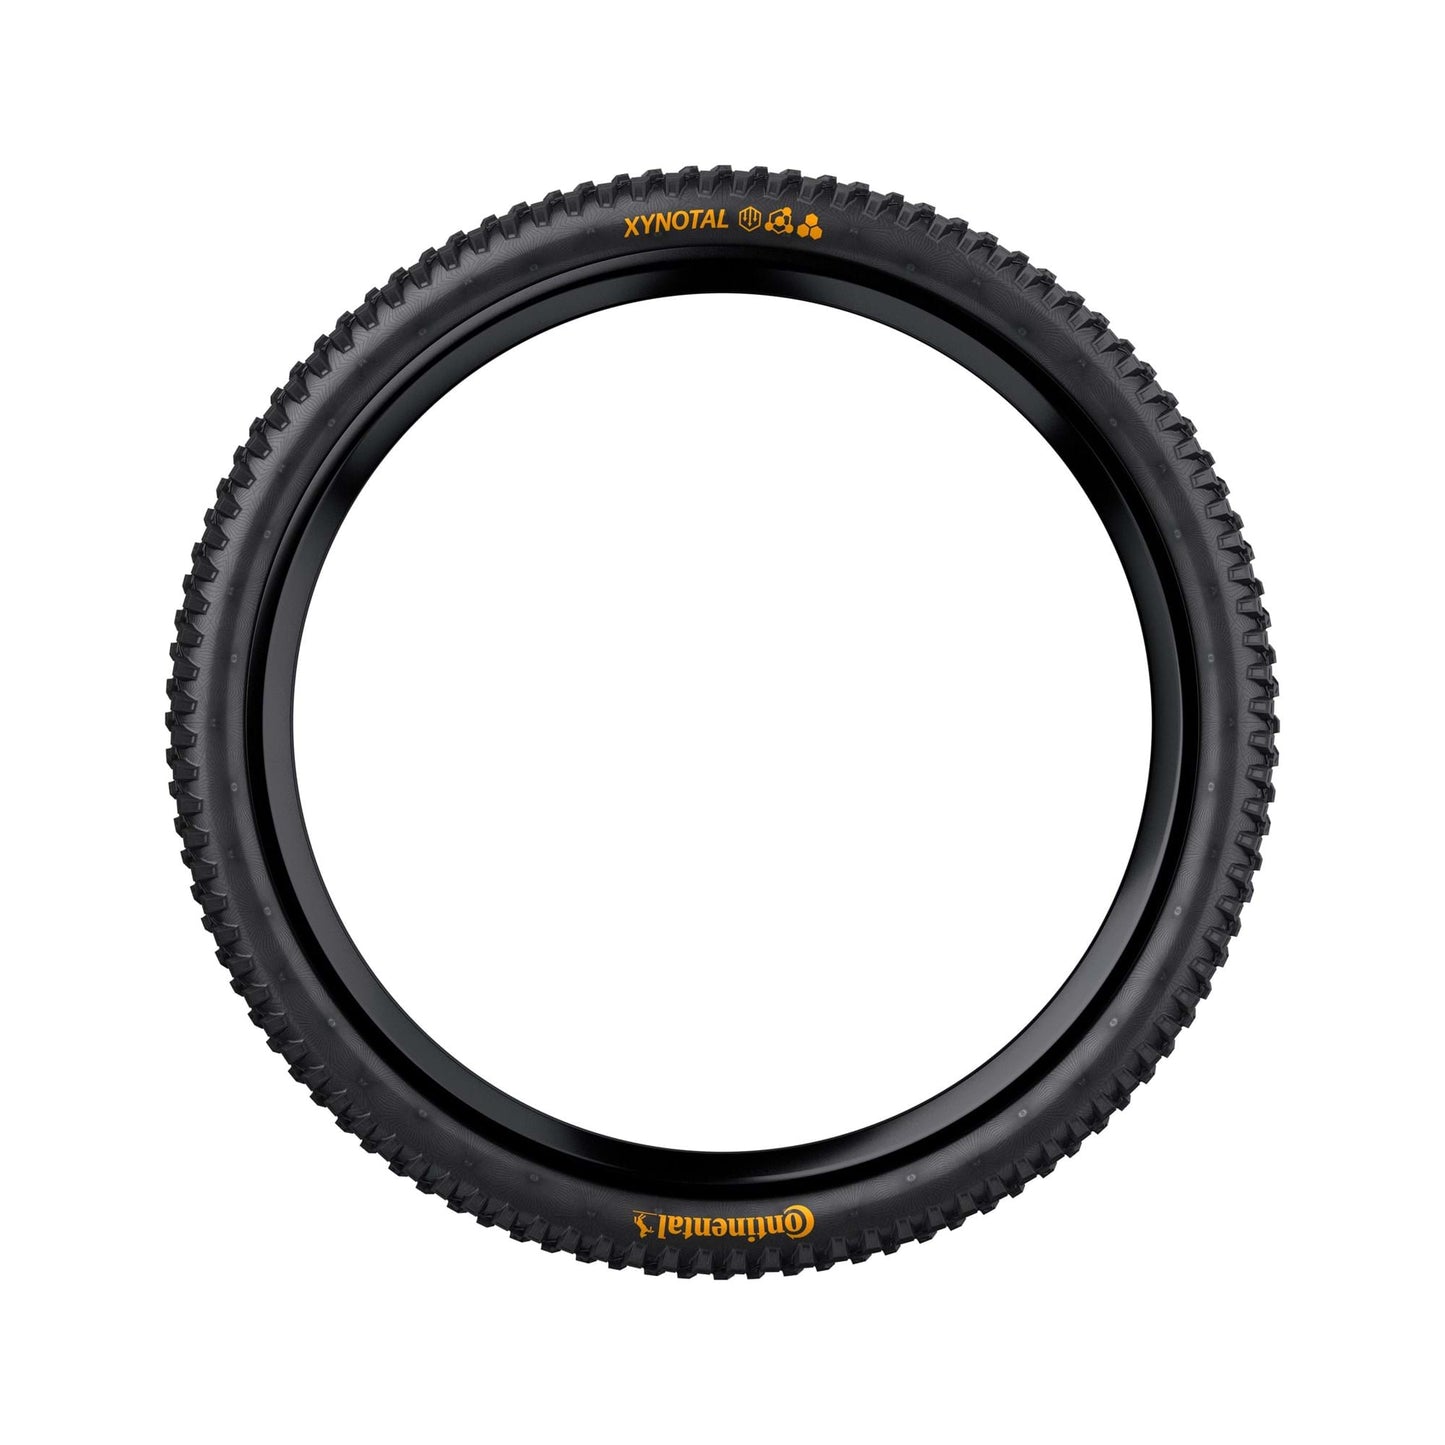 CONTINENTAL XYNOTAL DOWNHILL 27.5X2.40" SUPERSOFT FOLDING TYRE